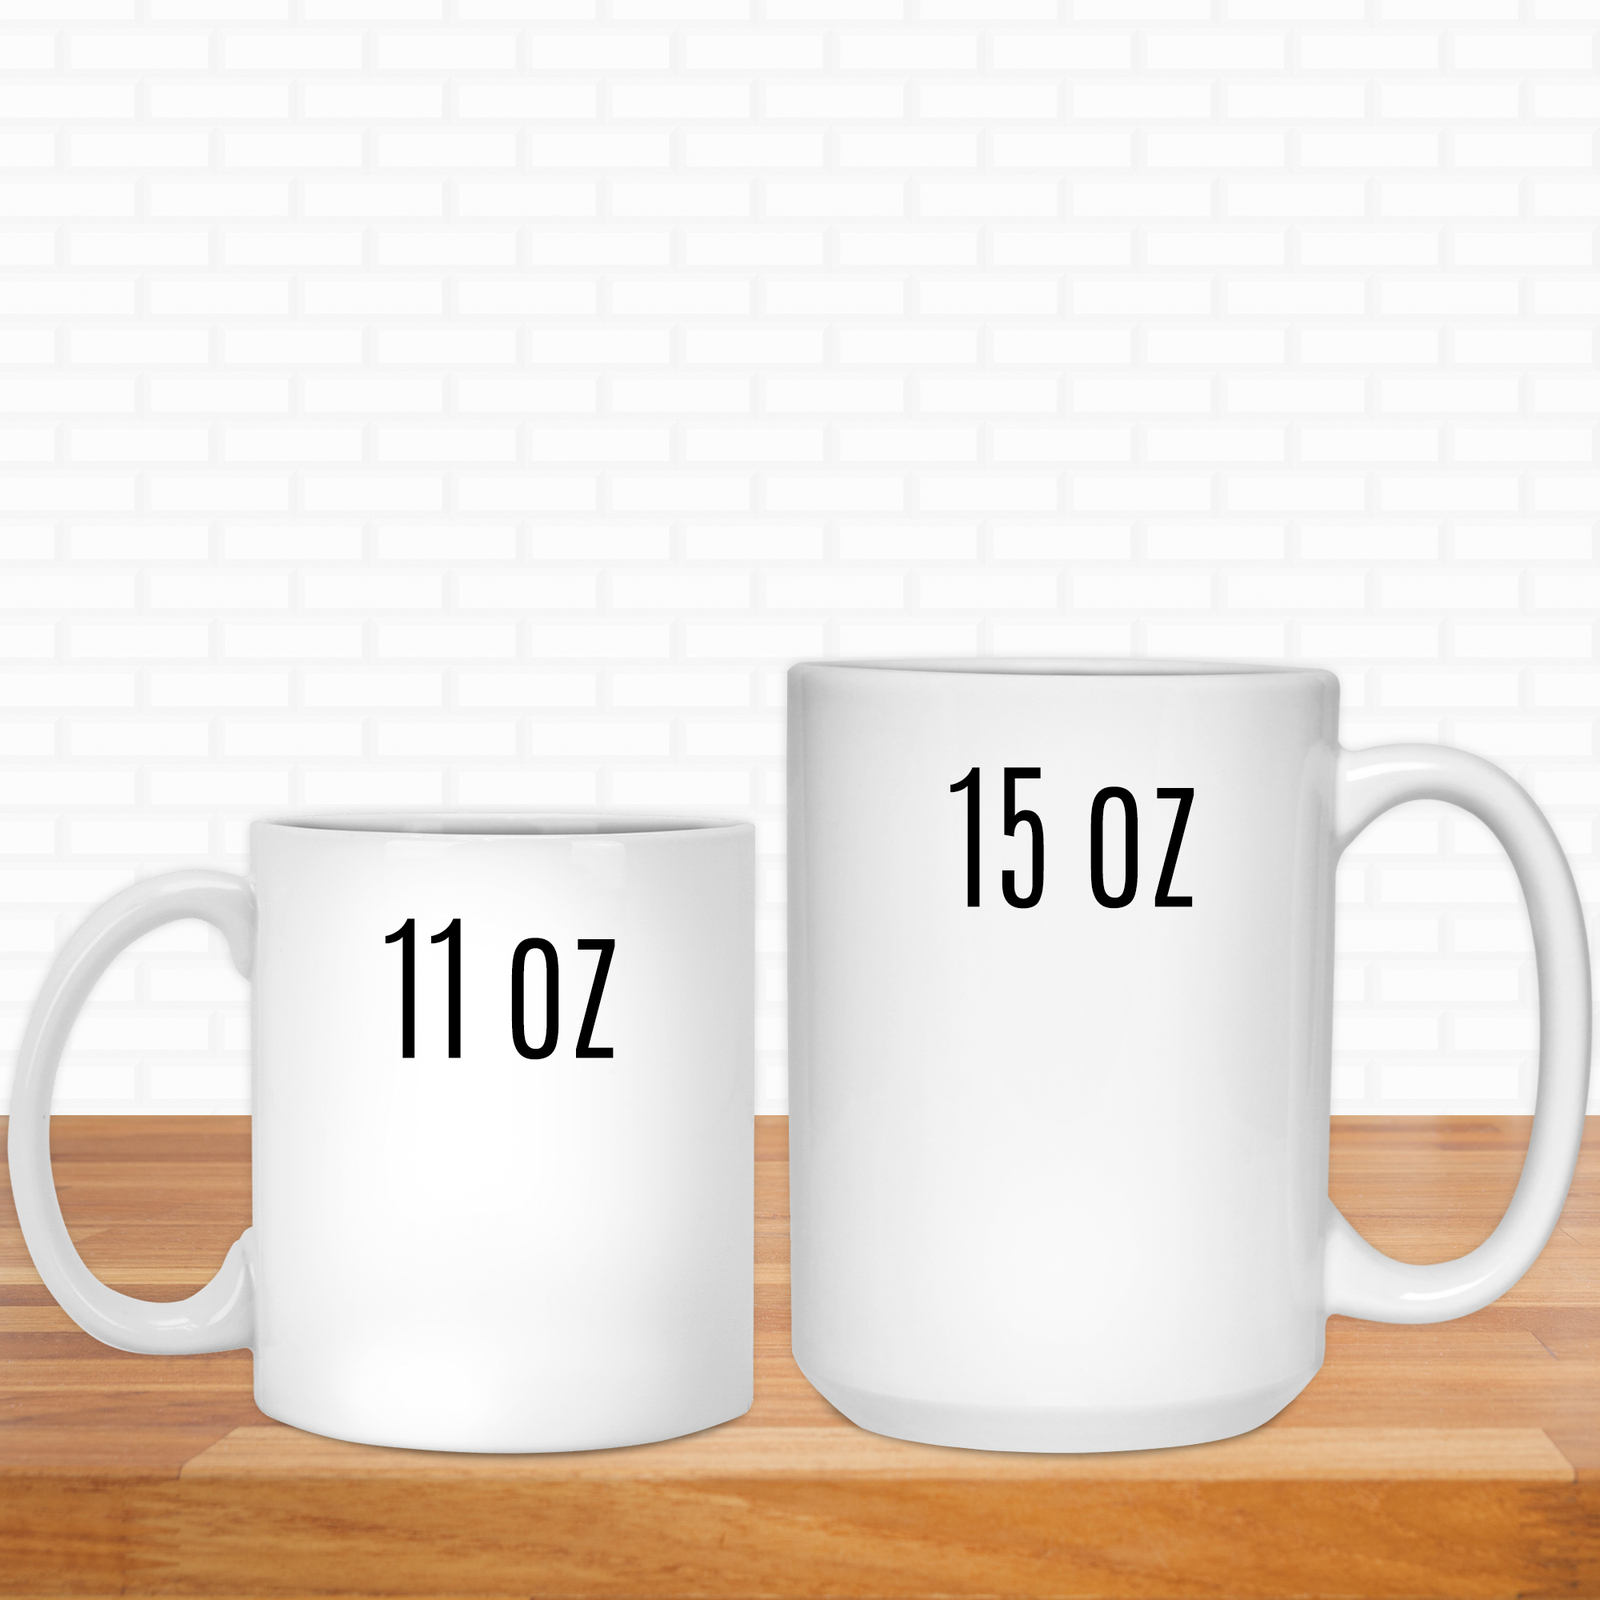 Best Friend Mug Coffee Cup Funny Gift Idea and 50 similar items